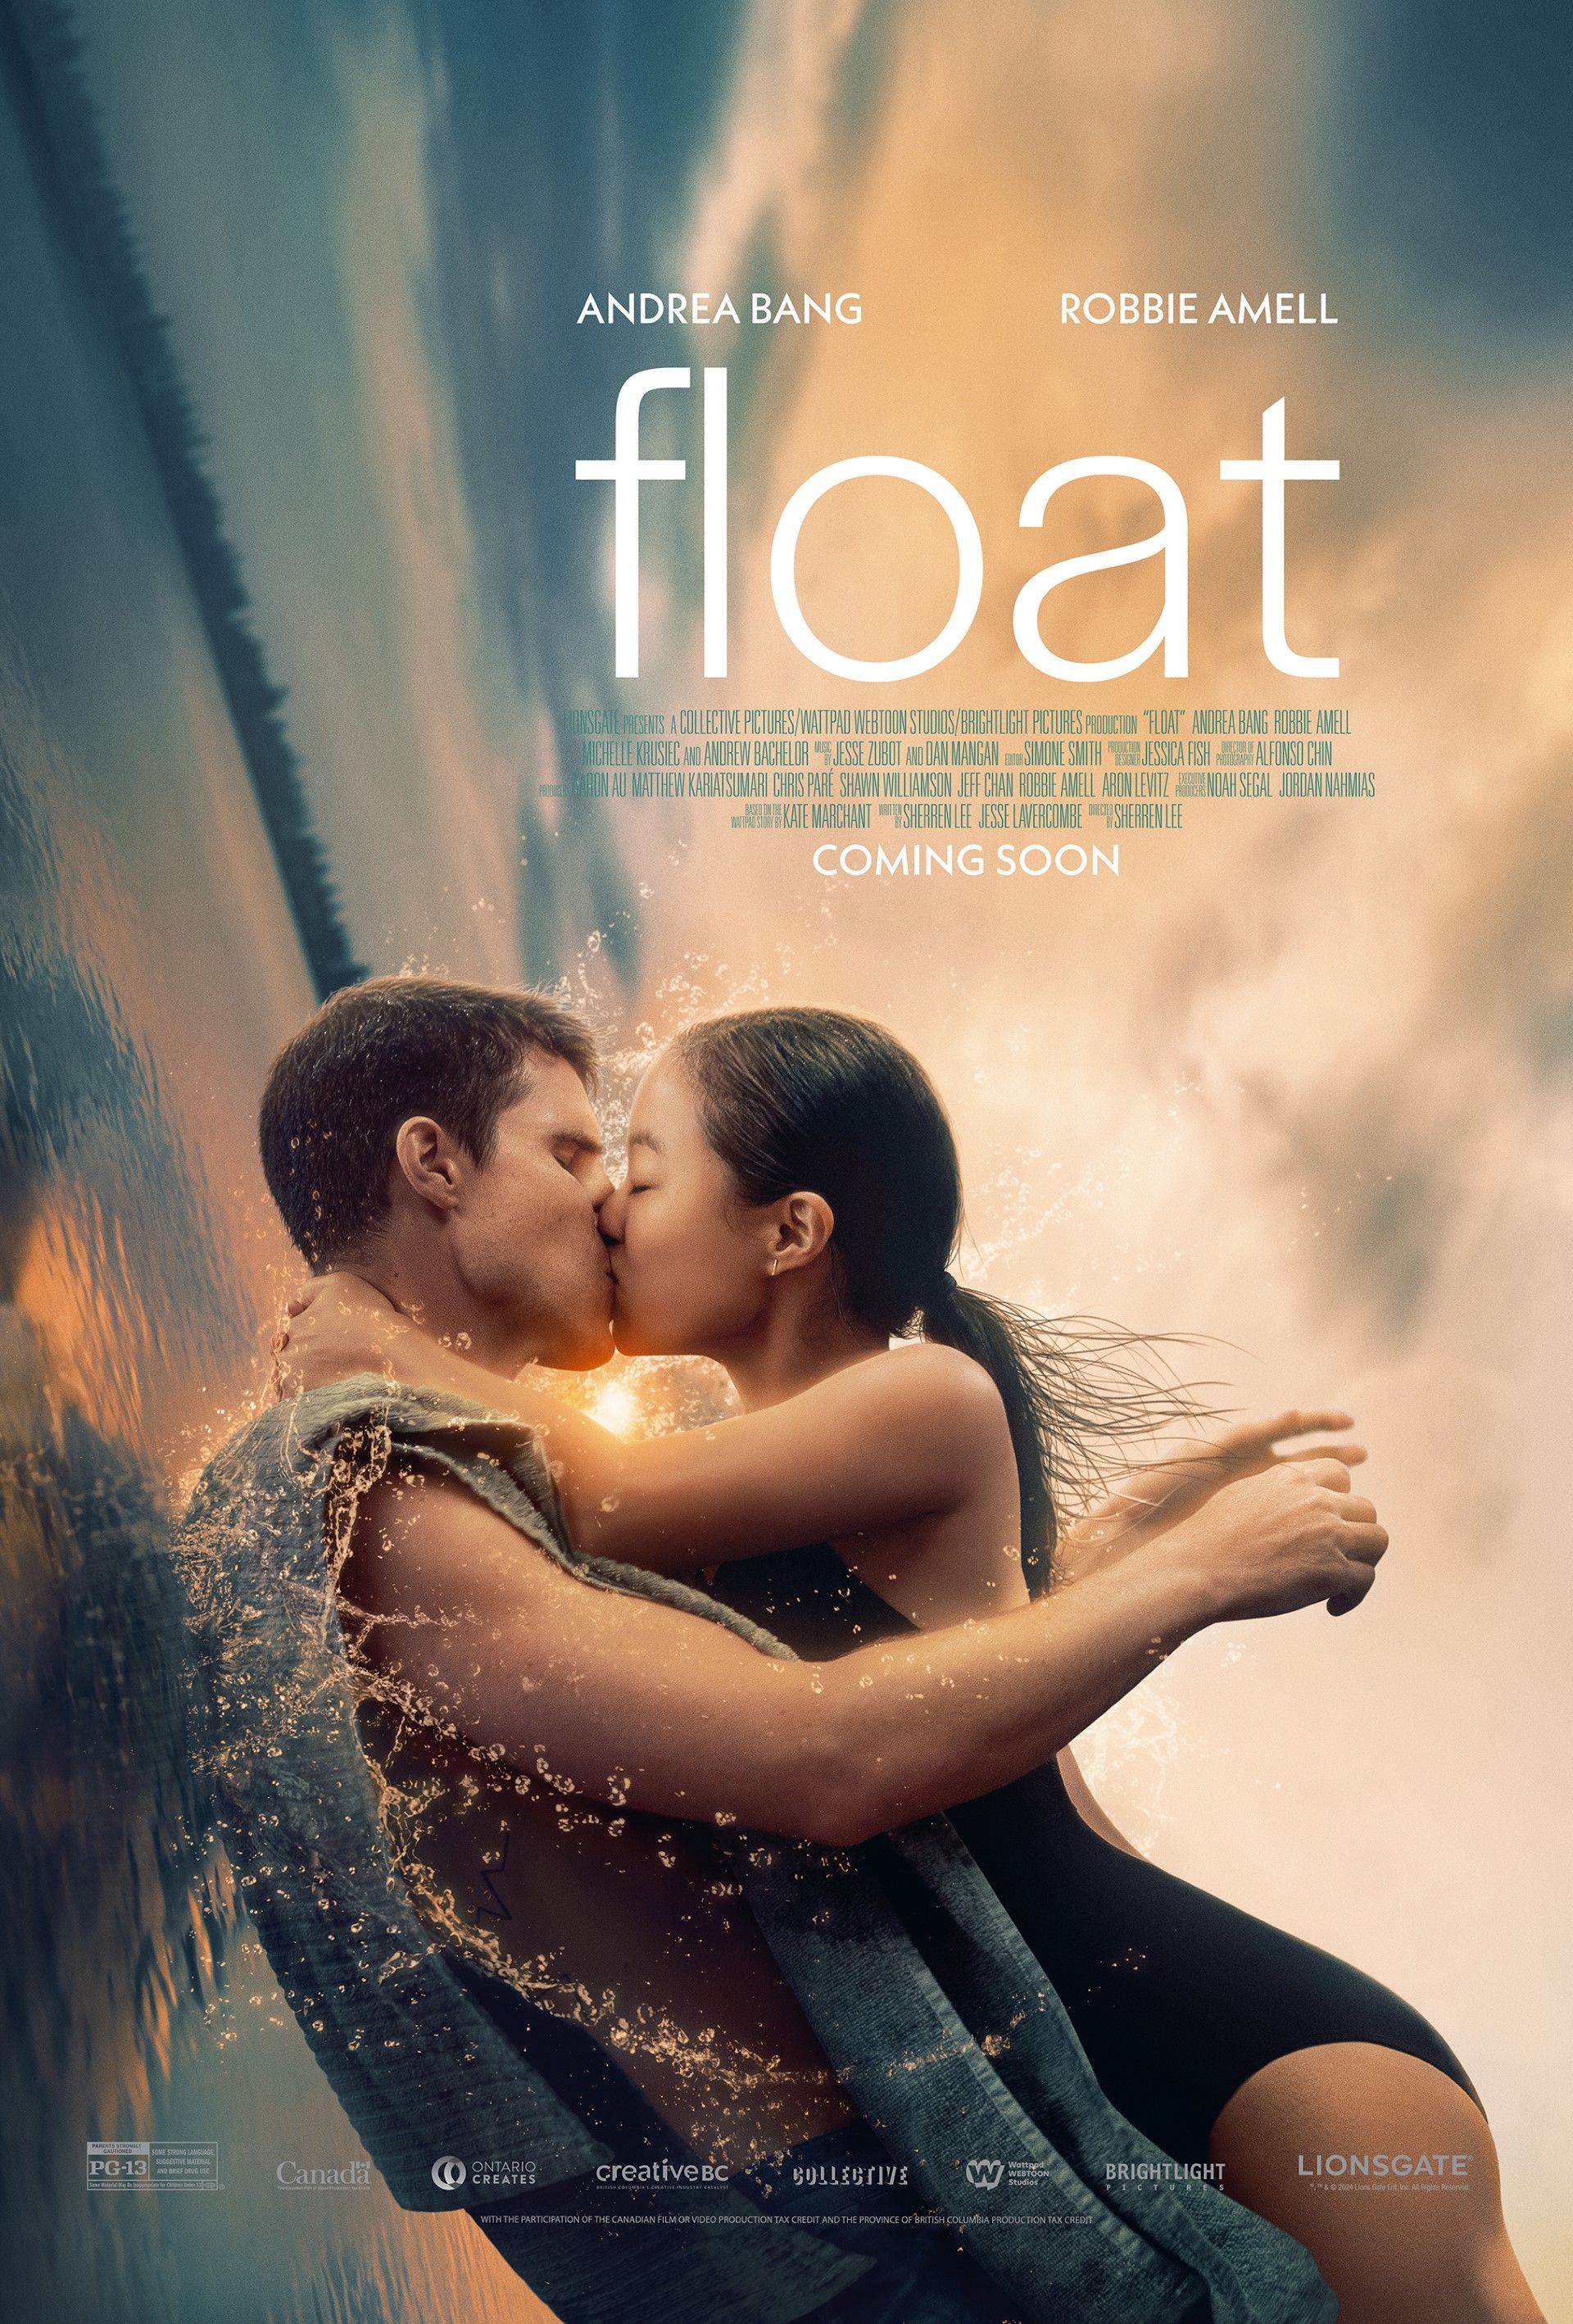 Andrea Bang and Robbie Amell on the poster for Float